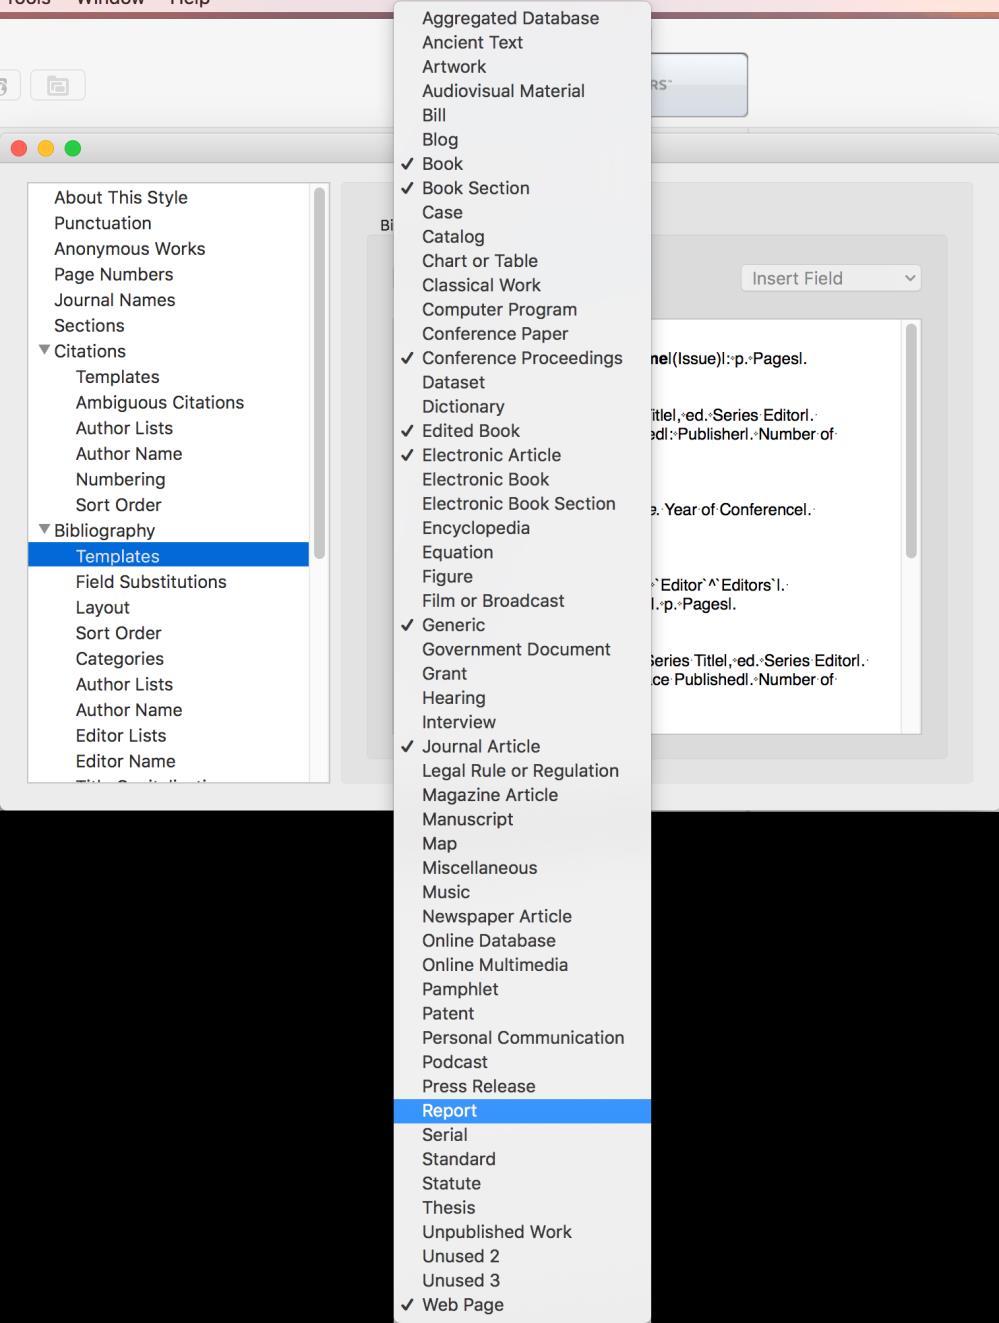 A new template for that reference type is added at the bottom of the Style window (scroll to the bottom of the Style window if you do not see it).